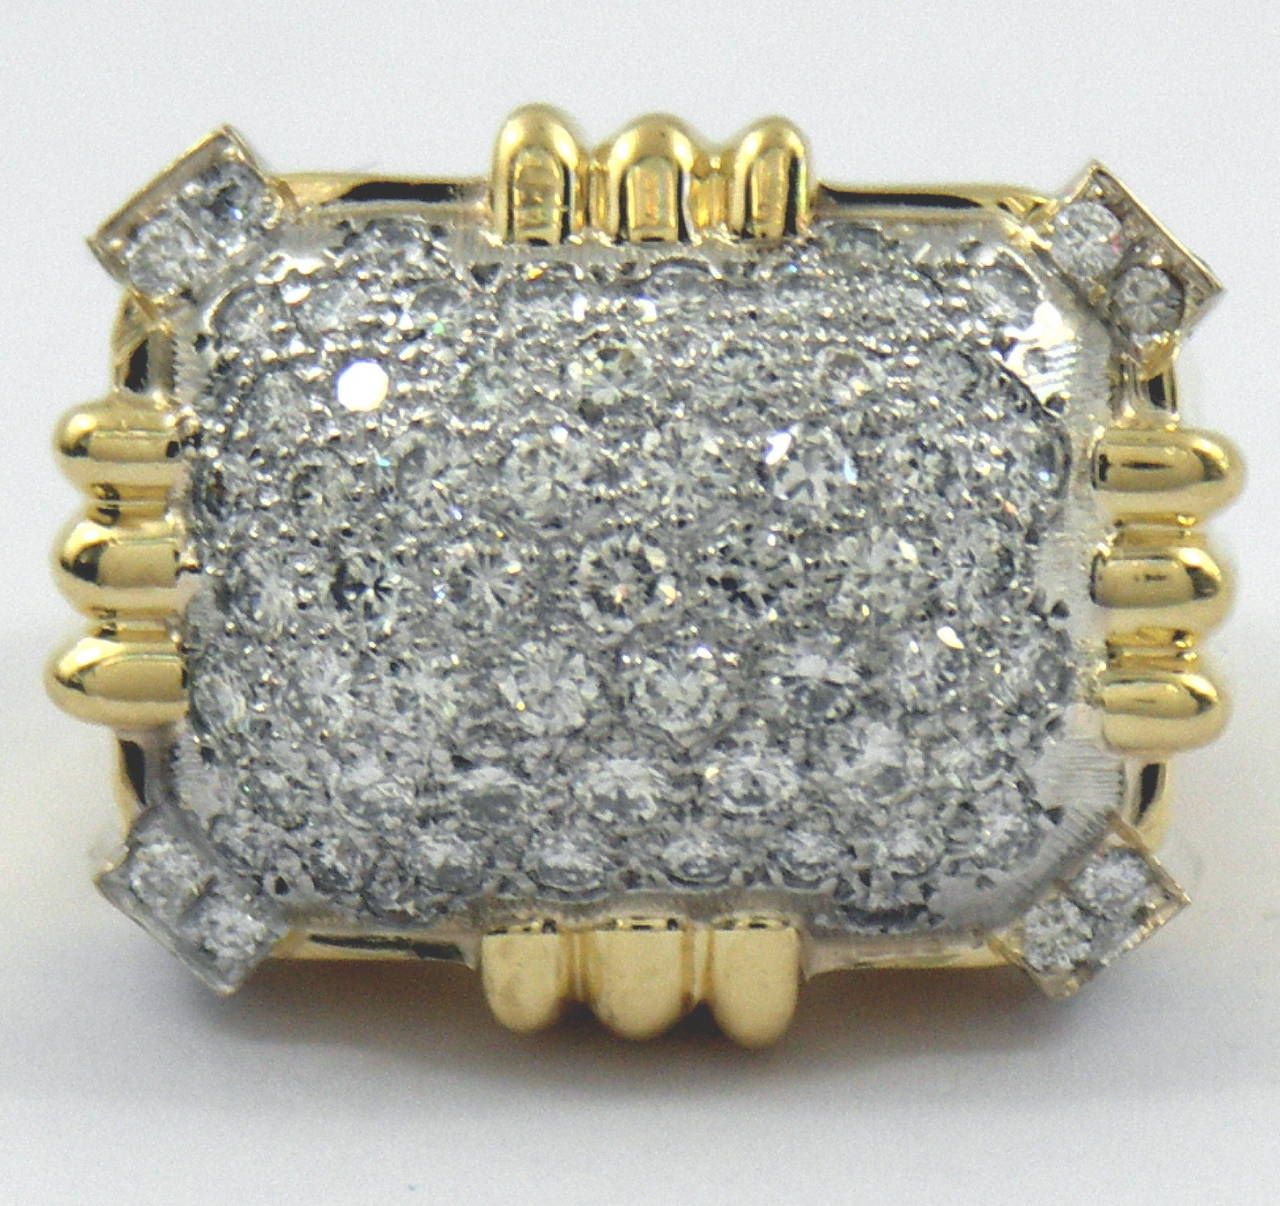 One 18K yellow gold ring measuring 3/4 of an inch long and 1 inch wide. This ring is set with G color VS1 clarity round brilliant cut diamonds, weighing a total of approximately 2.25ct. The contoured motifs on the north, south, east, and west of the